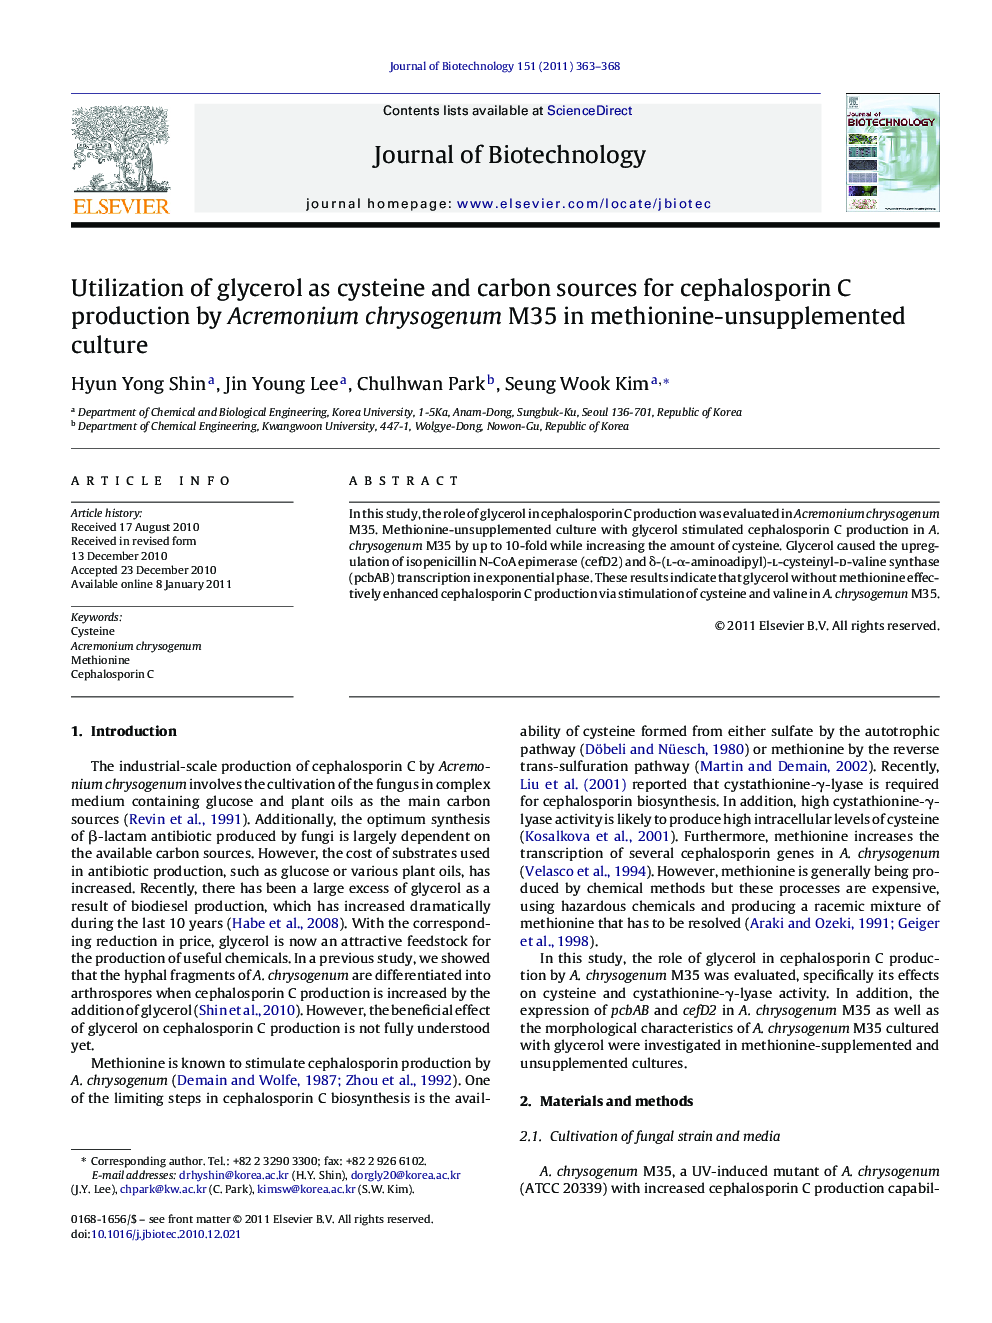 Utilization of glycerol as cysteine and carbon sources for cephalosporin C production by Acremonium chrysogenum M35 in methionine-unsupplemented culture